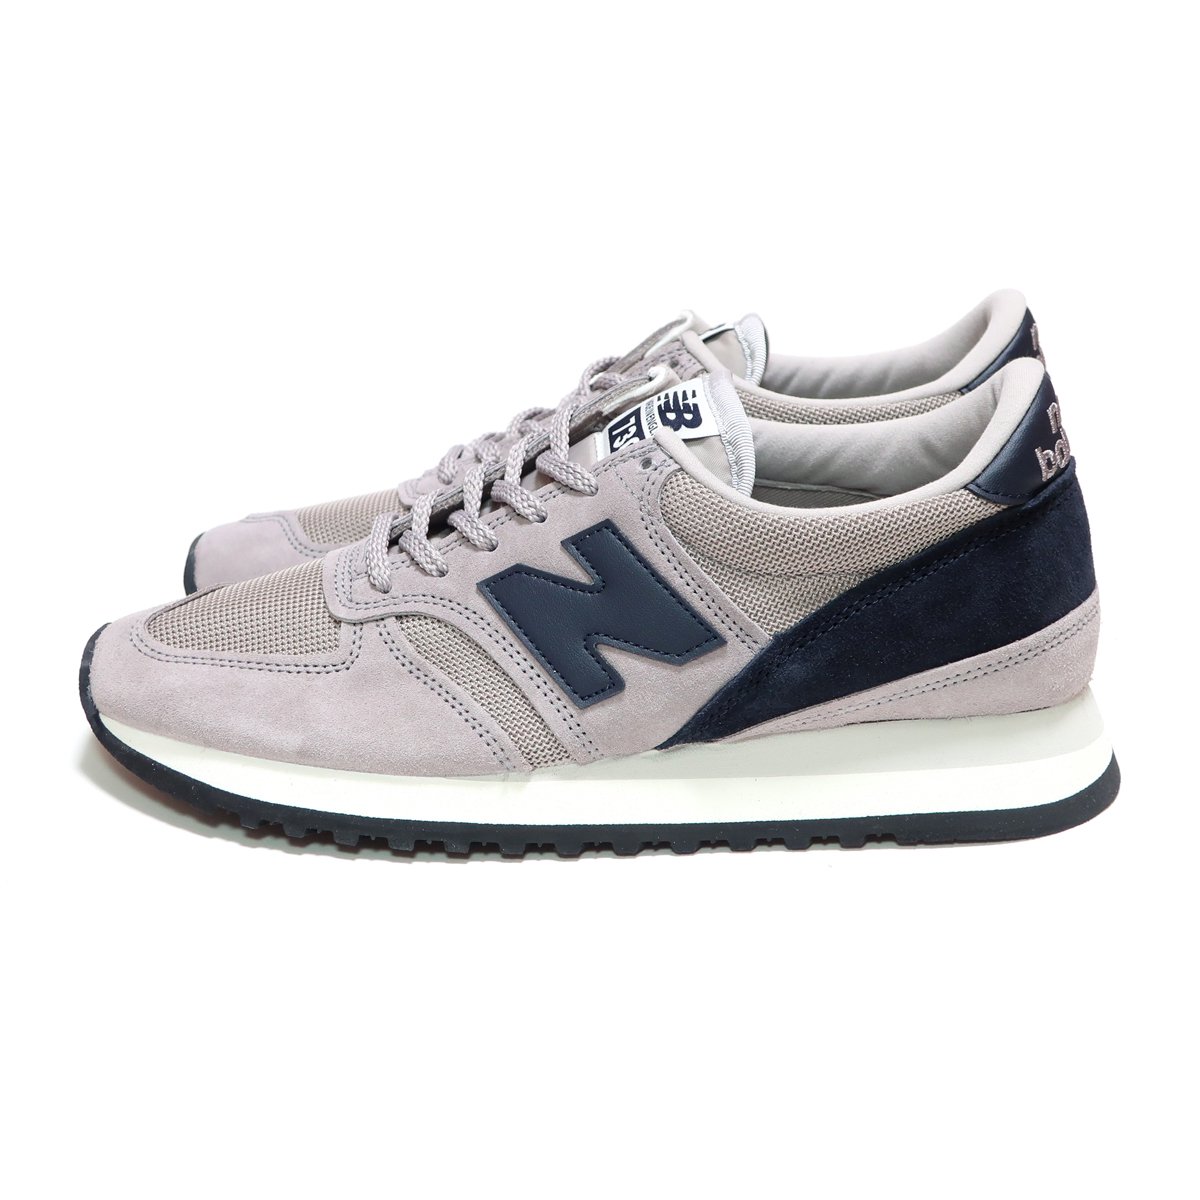 NEW BALANCE M730GGN GREY NAVY GRAY MADE IN ENGLAND ...